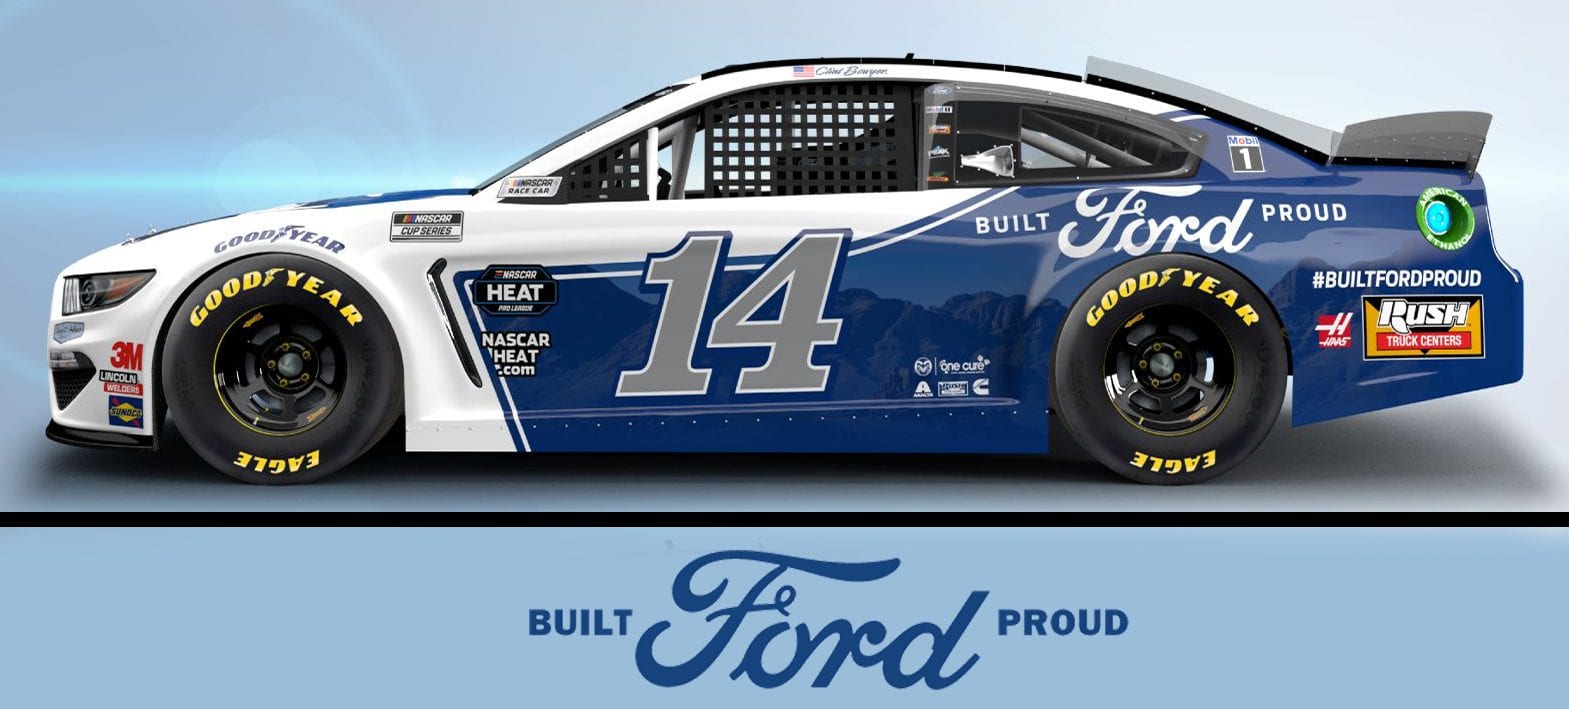 Built Ford Proud will be highlighted on Clint Bowyer's No. 14 Ford this weekend at Bristol Motor Speedway.